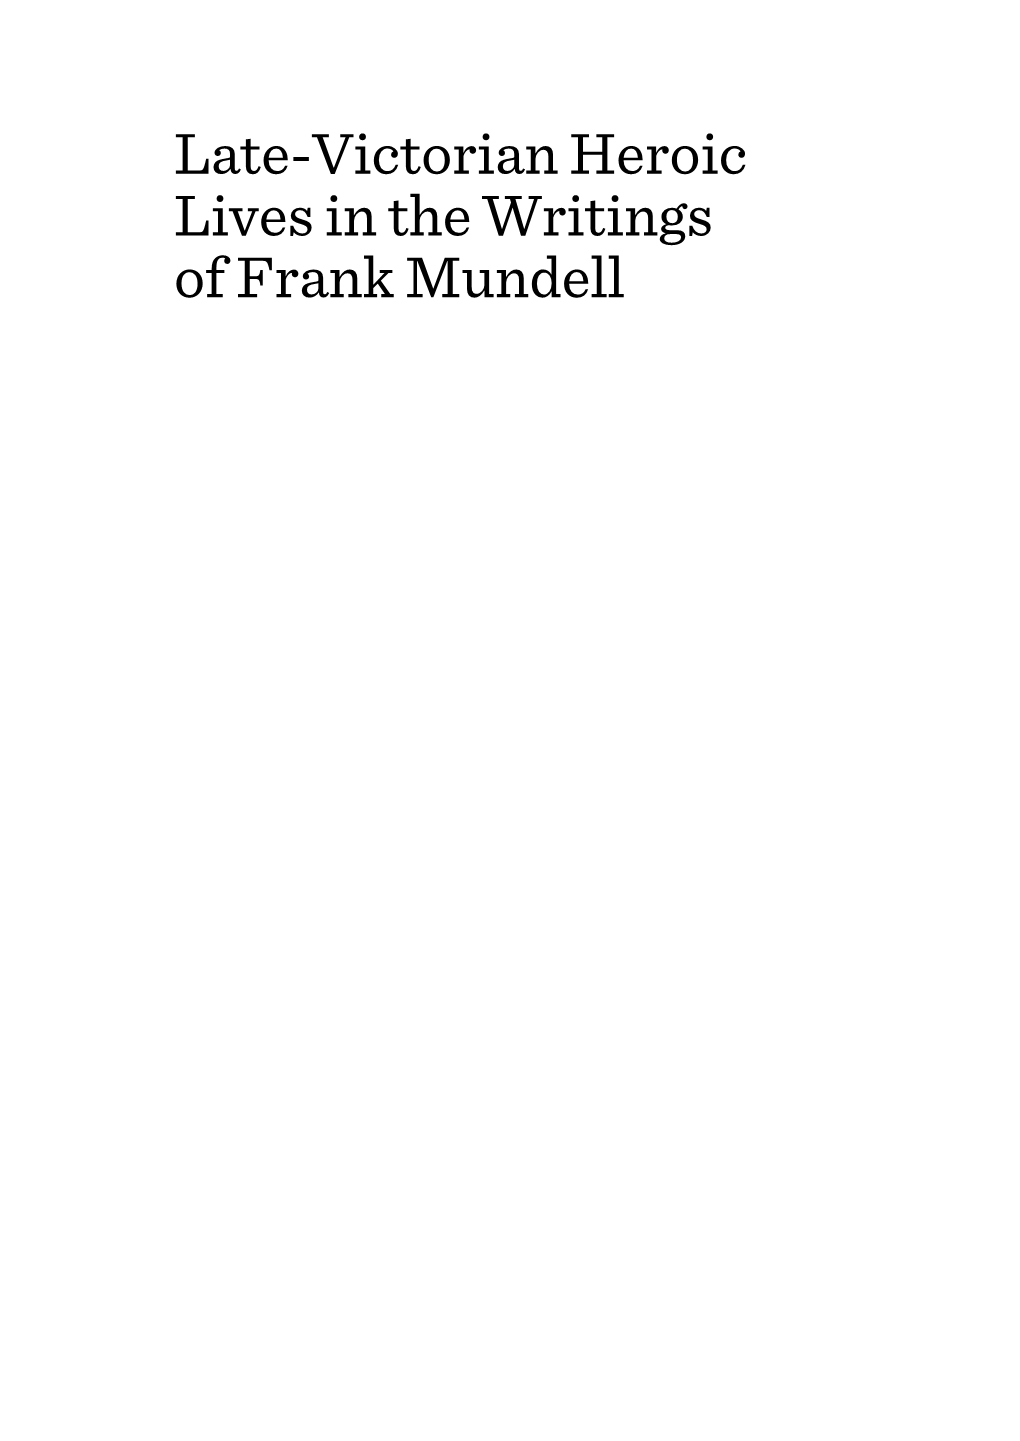 Late-Victorian Heroic Lives in the Writings of Frank Mundell